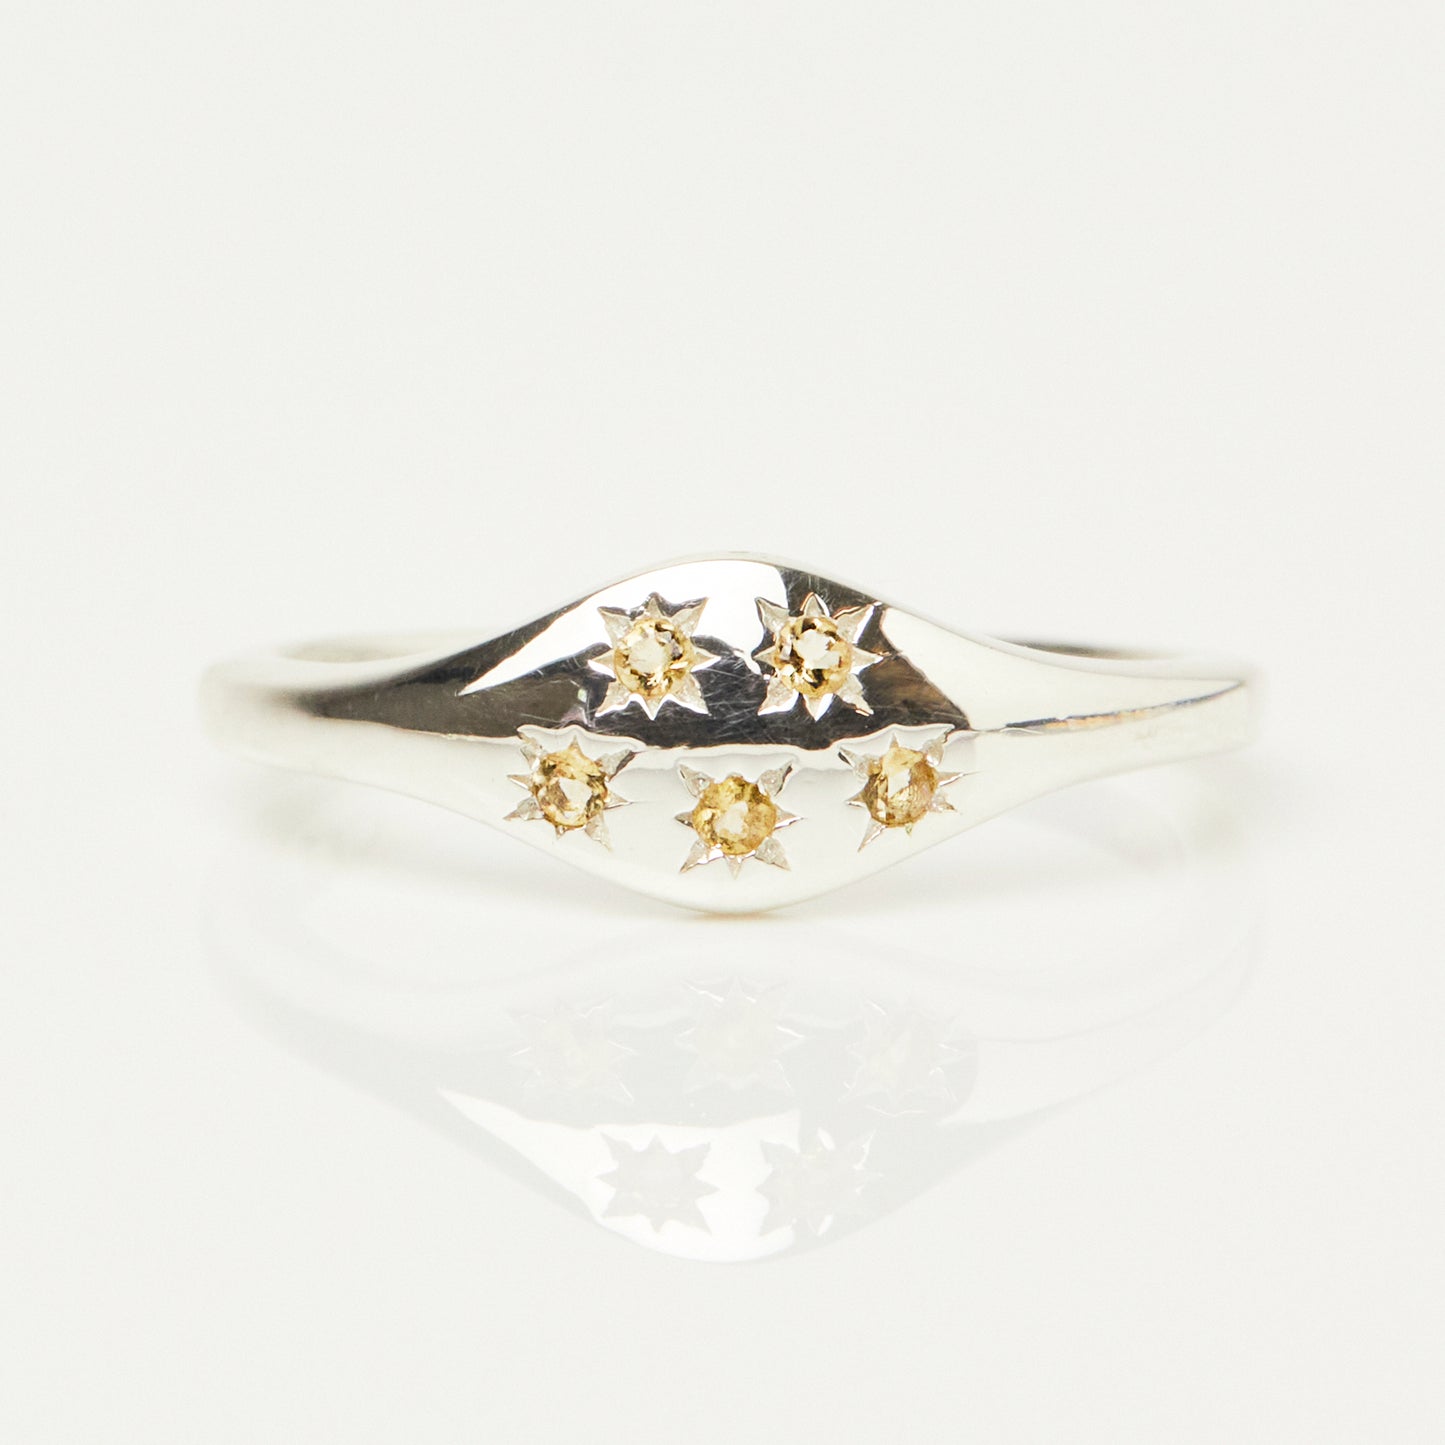 Zoe sugg intentions success citrine ring in silver